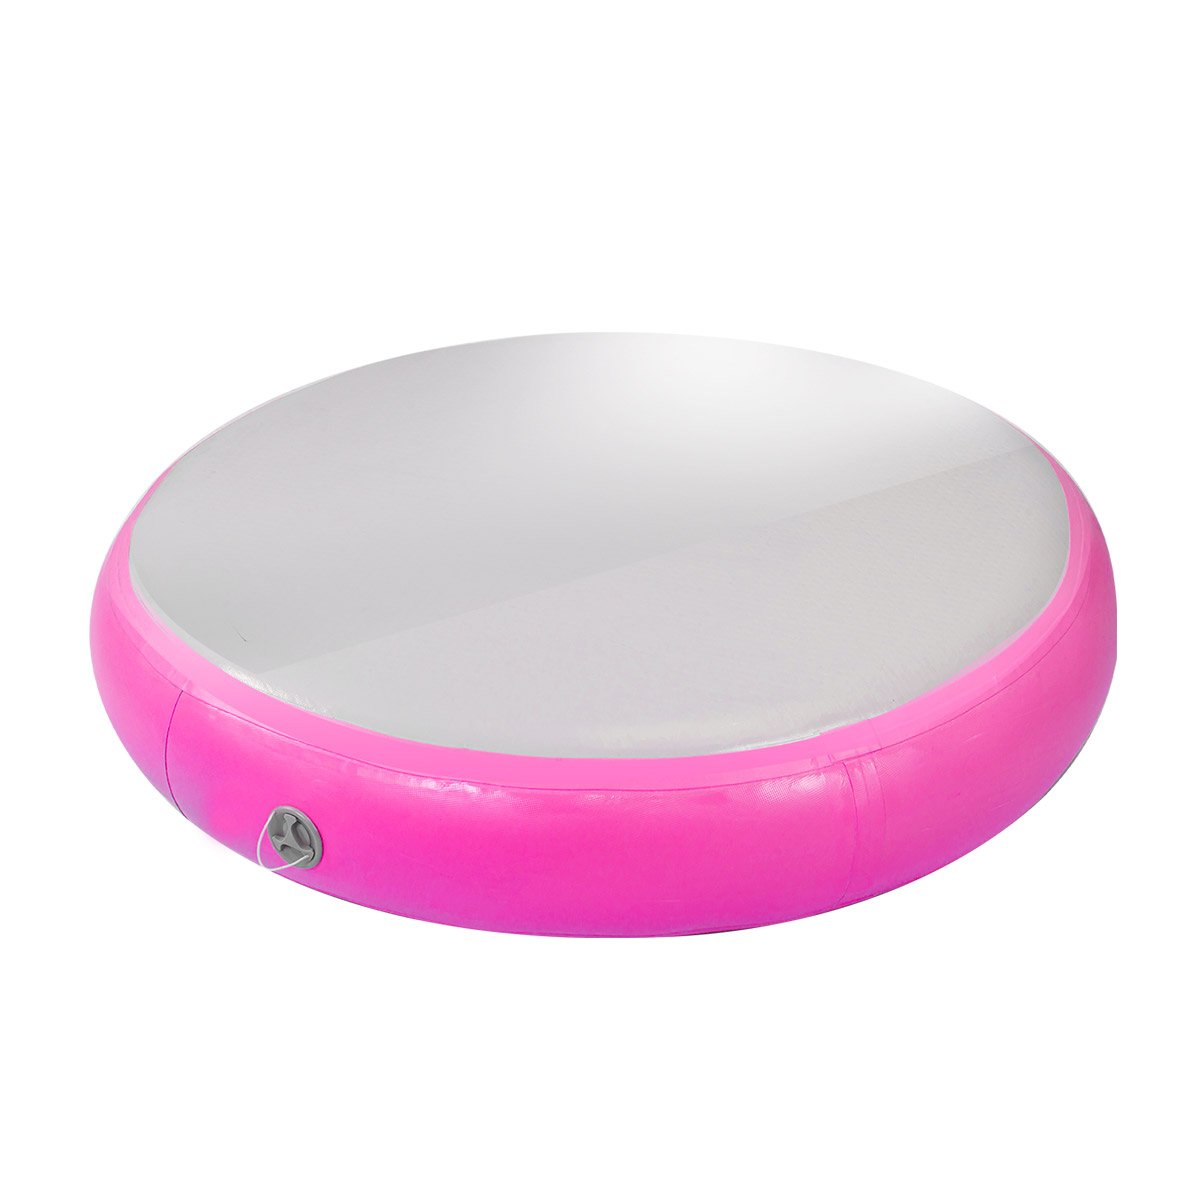 1m Air Spot Round Inflatable Gymnastics Tumbling Mat with Pump - Pink 1